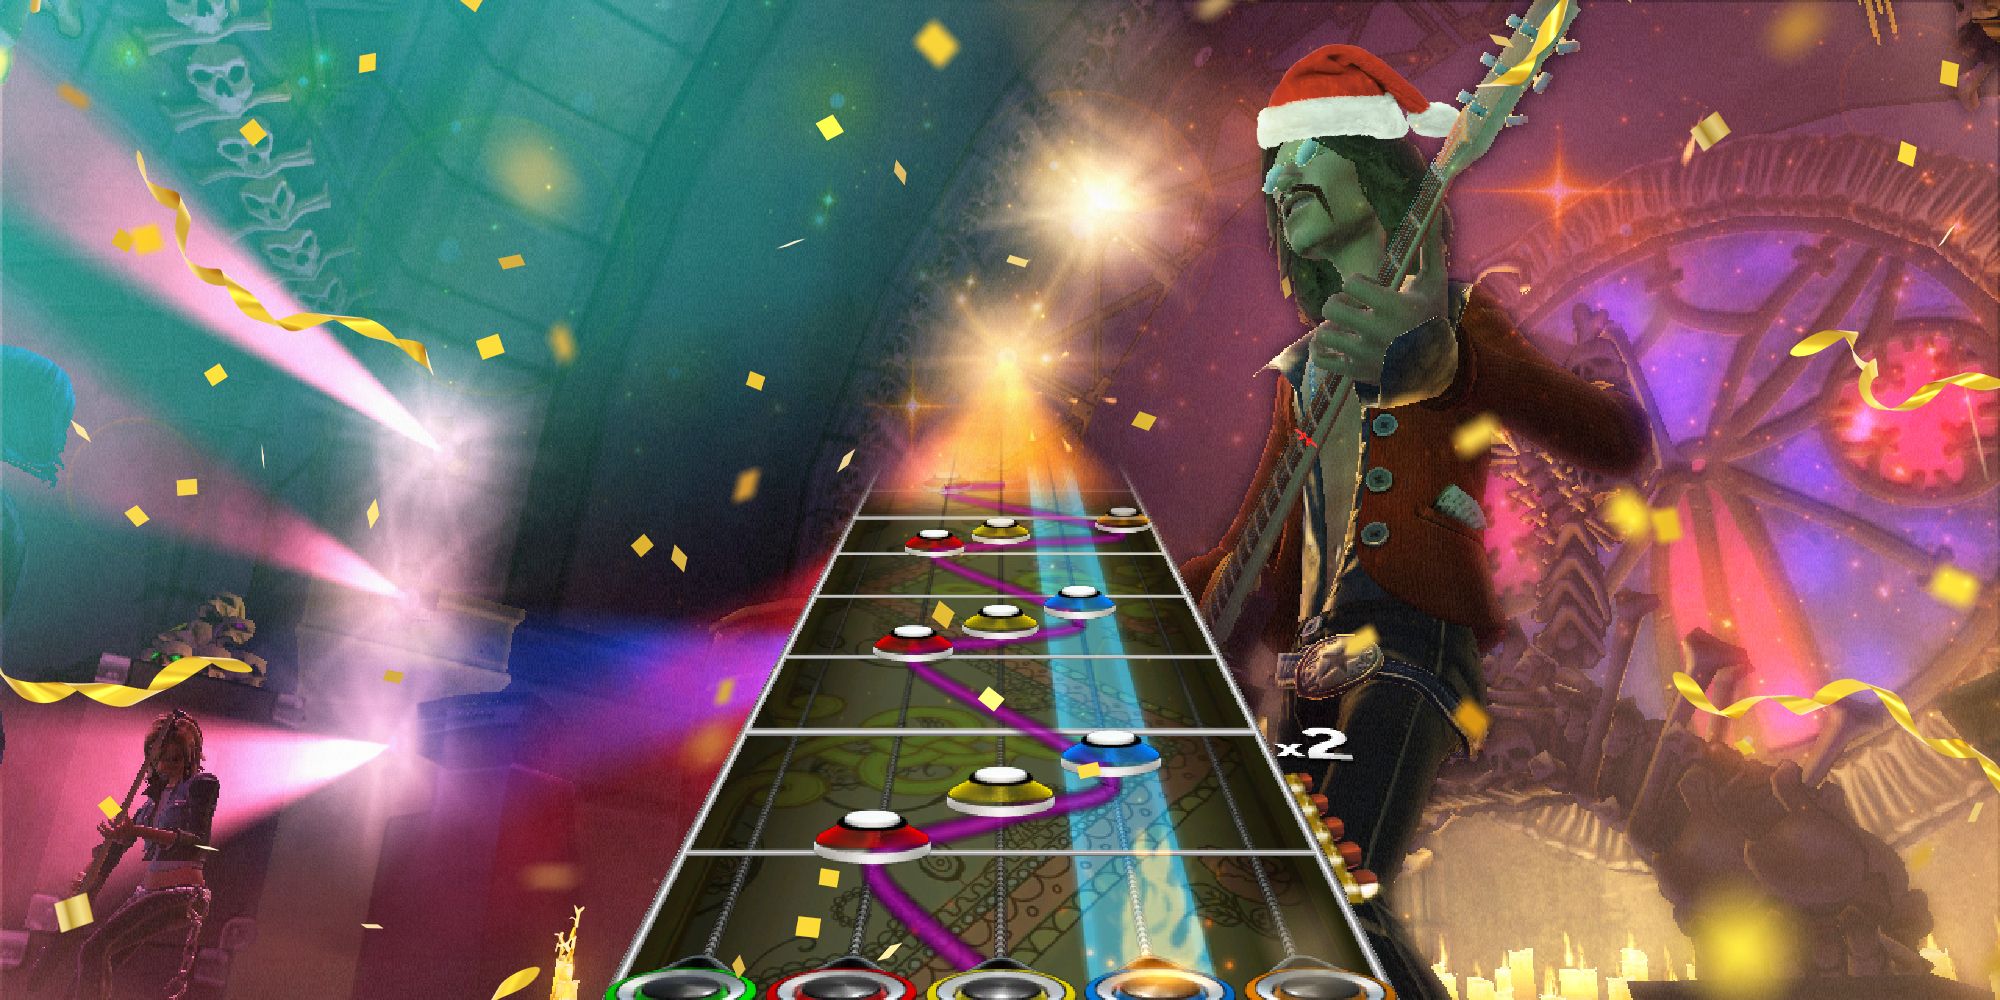 A screenshot from Guitar Hero World Tour with one of the characters wearing a Christmas hat